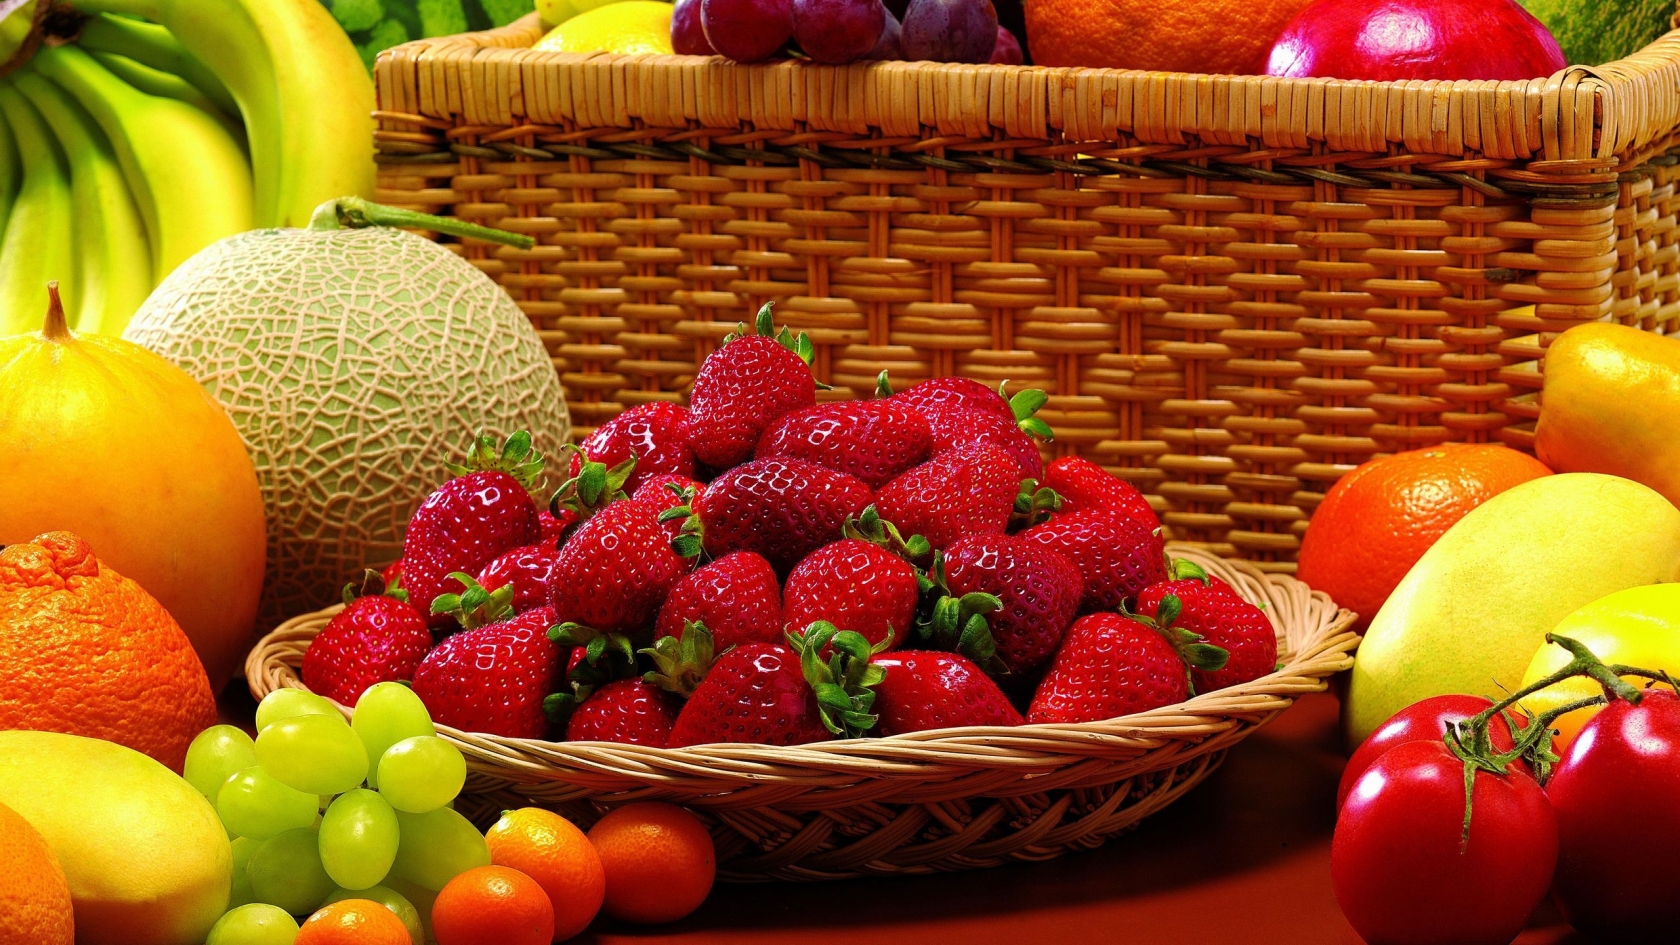 Amazing Fruits for 1680 x 945 HDTV resolution